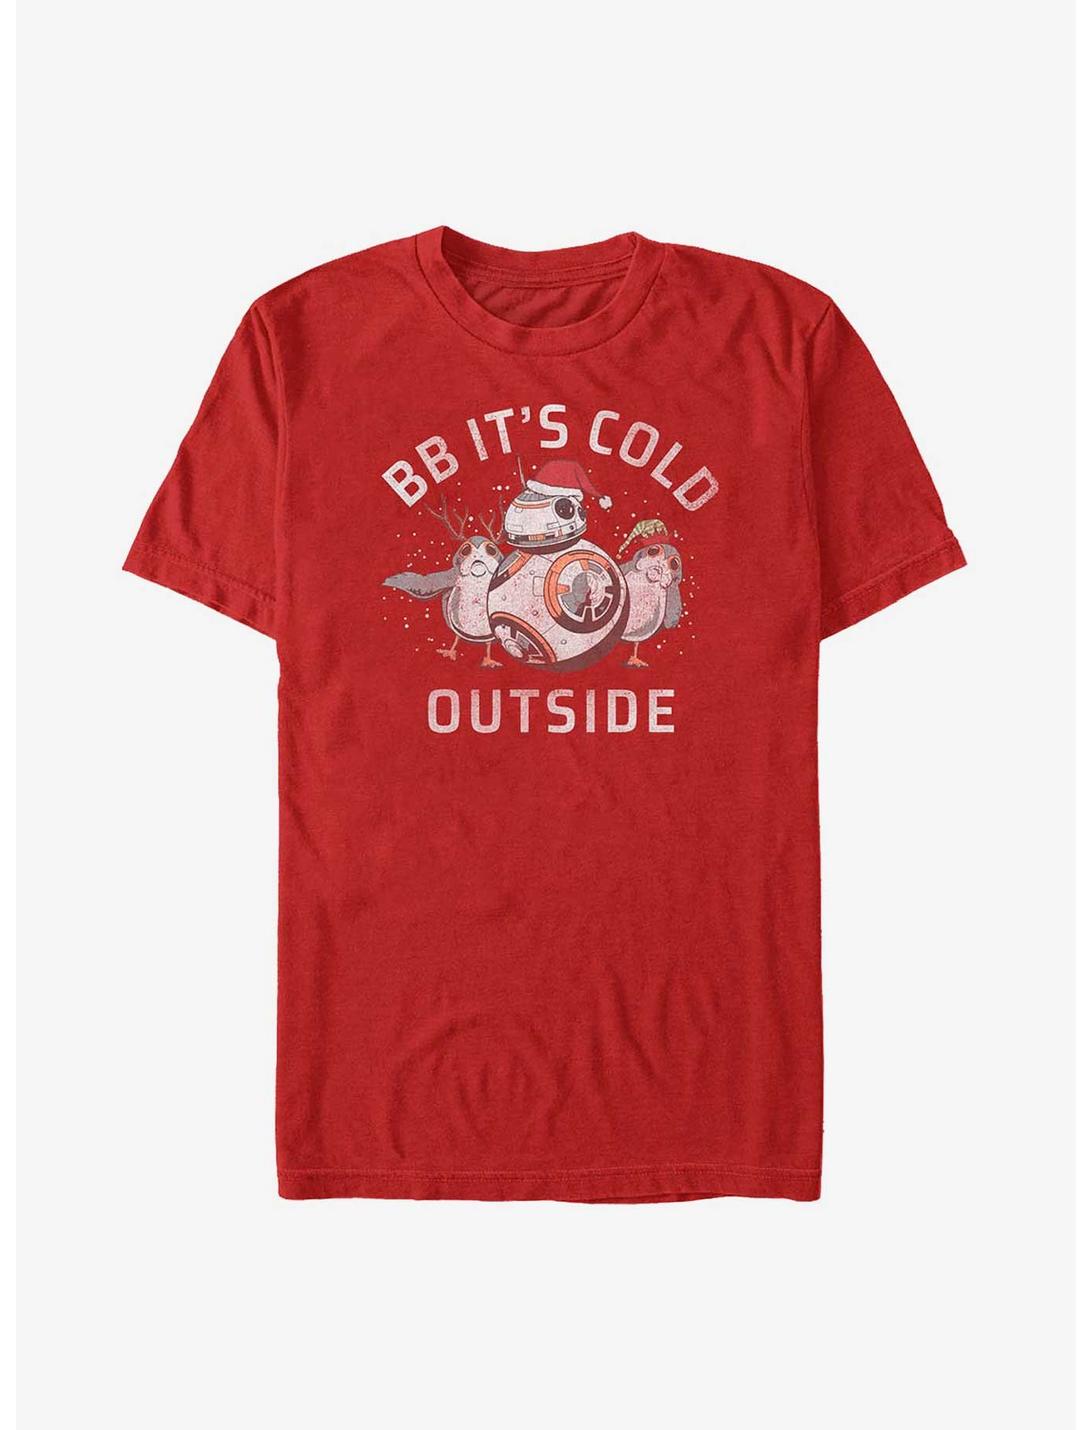 Star Wars BB It's Cold Outside T-Shirt, RED, hi-res